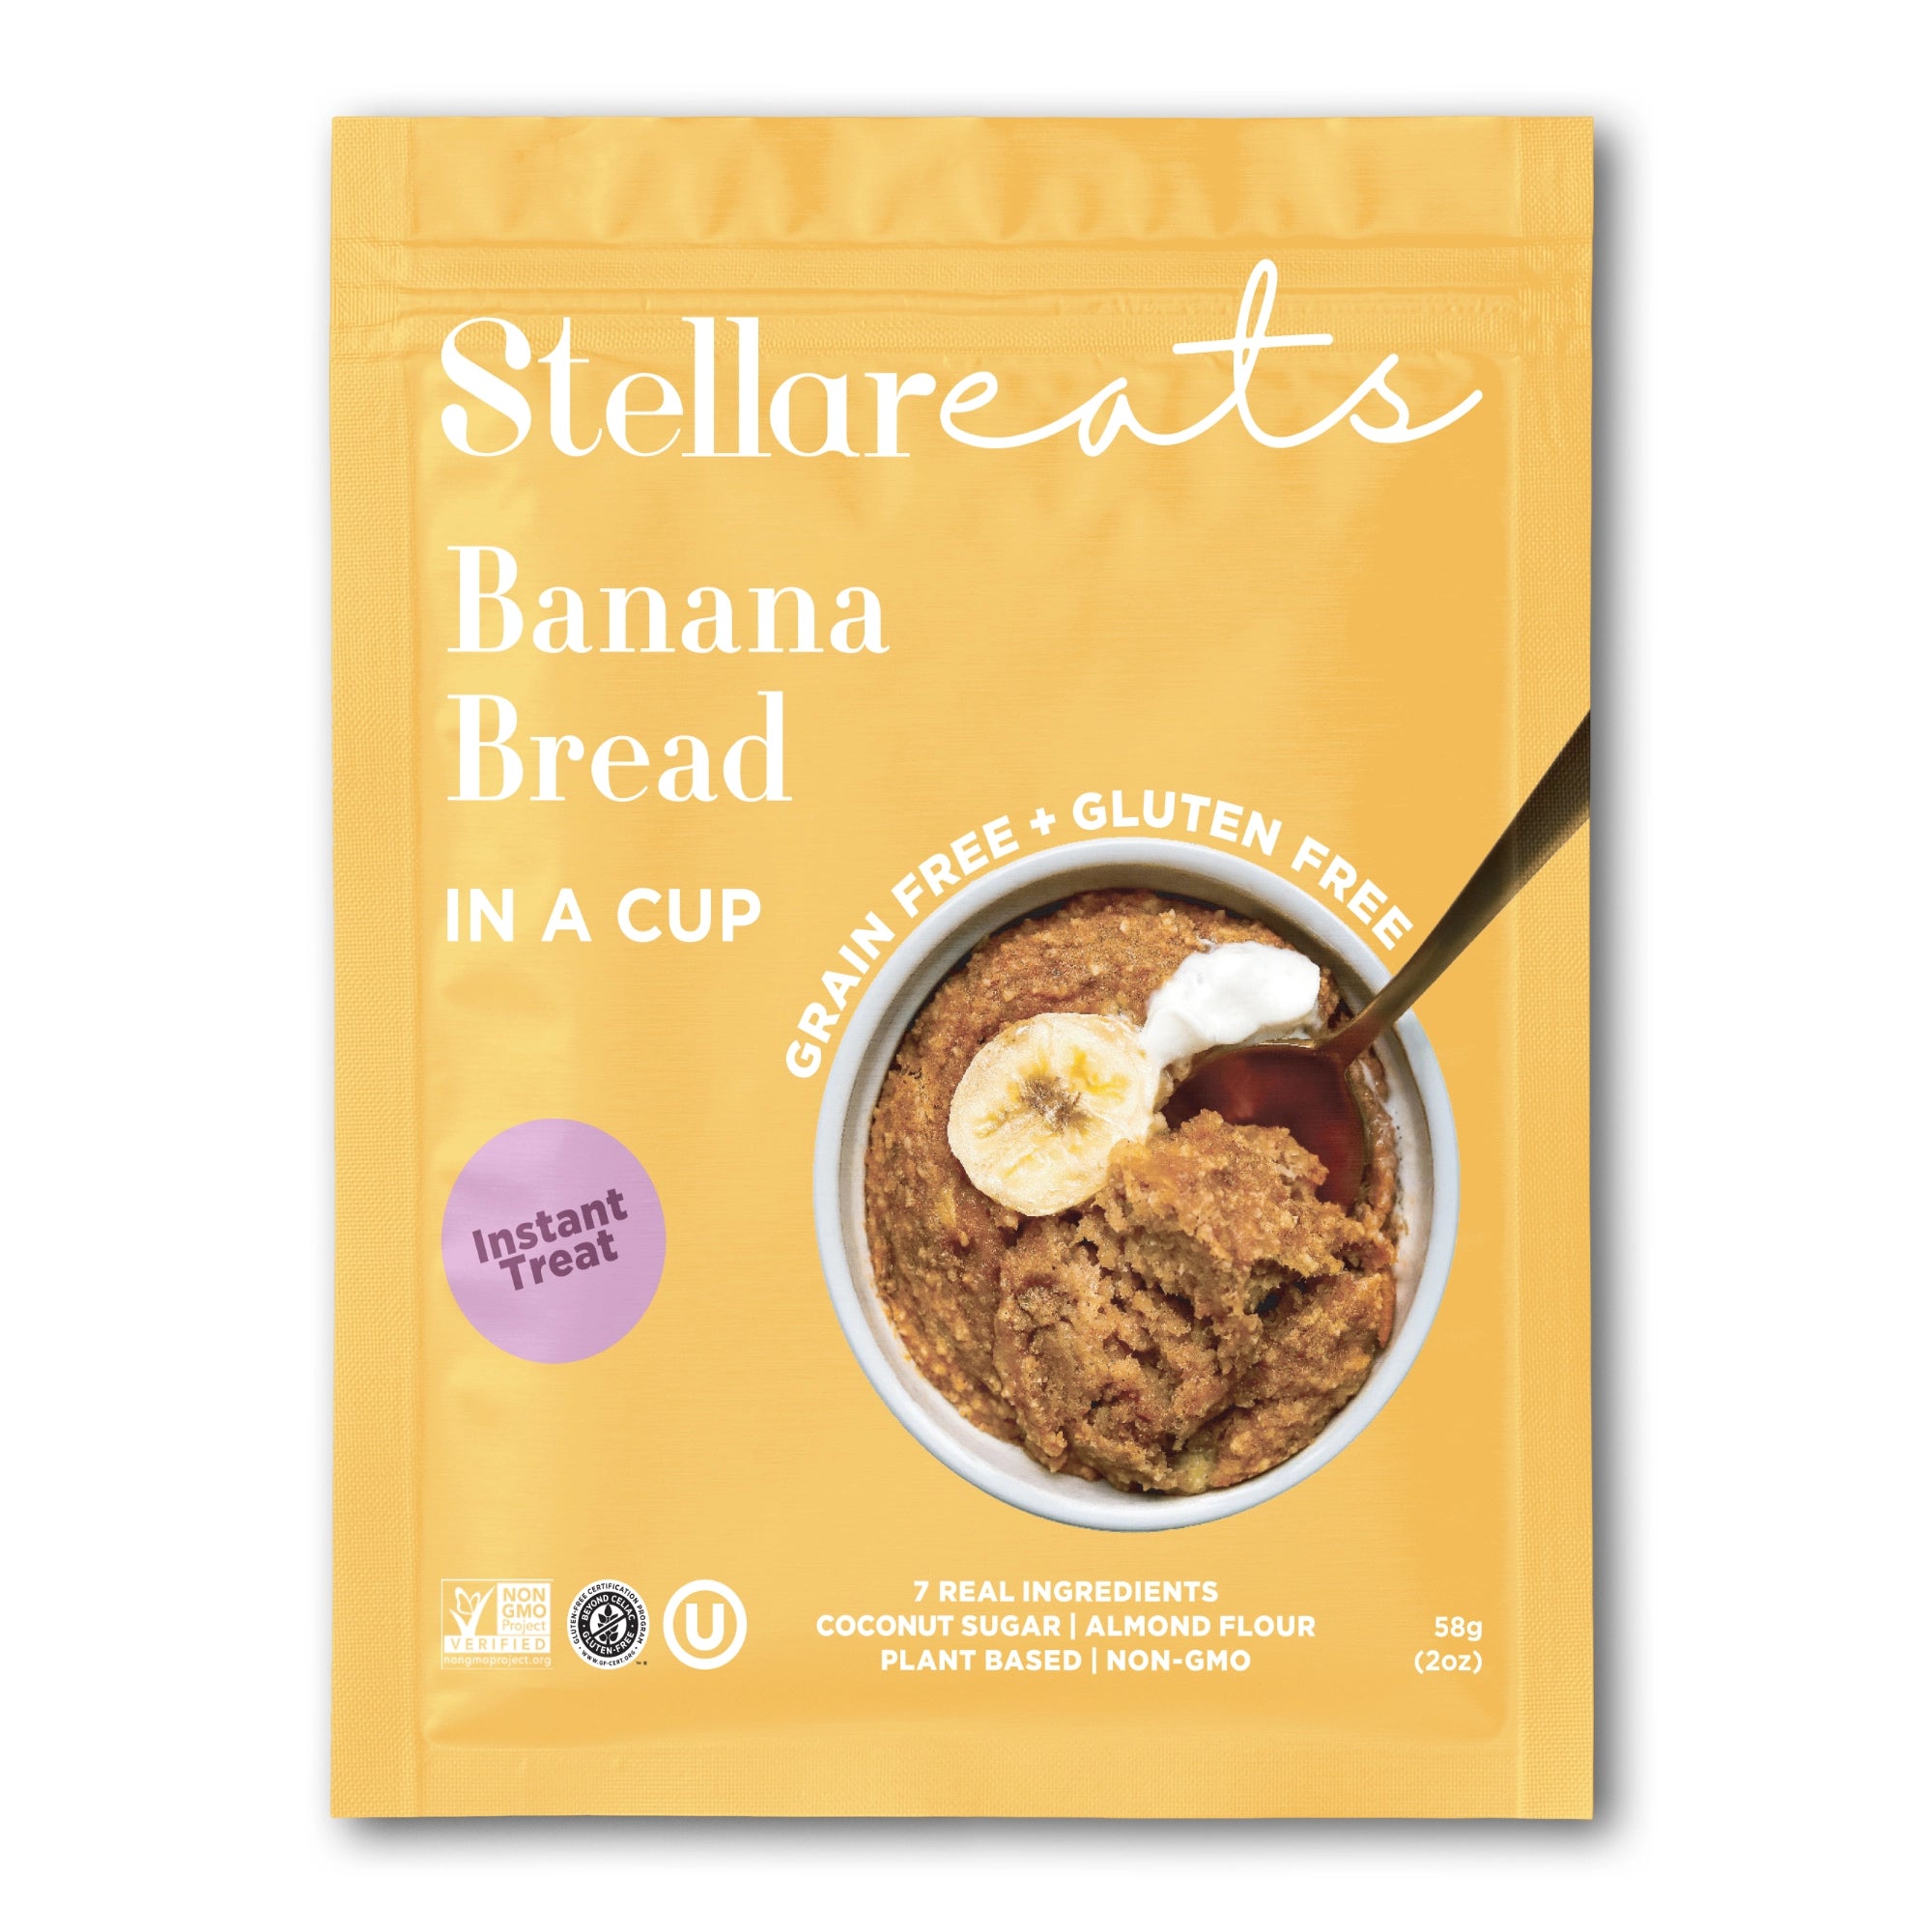 Stellar Eats Banana Bread in A Cup Yellow Packet